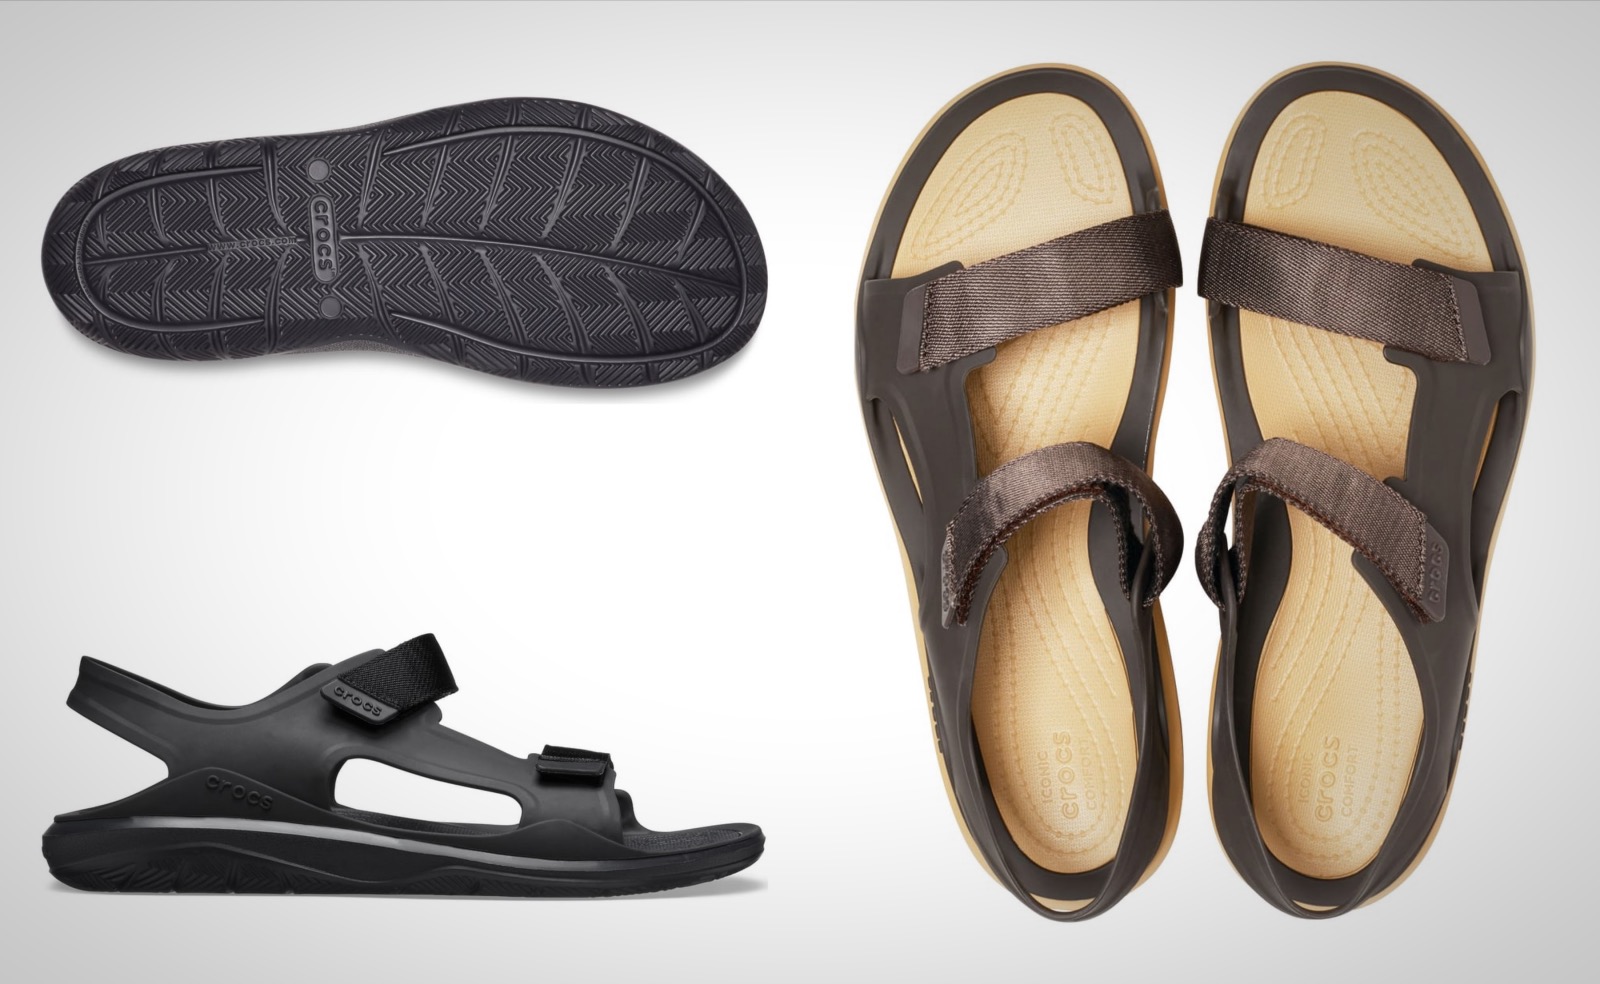 The Crocs Swiftwater Expedition Sandal For All Of Life's Adventures